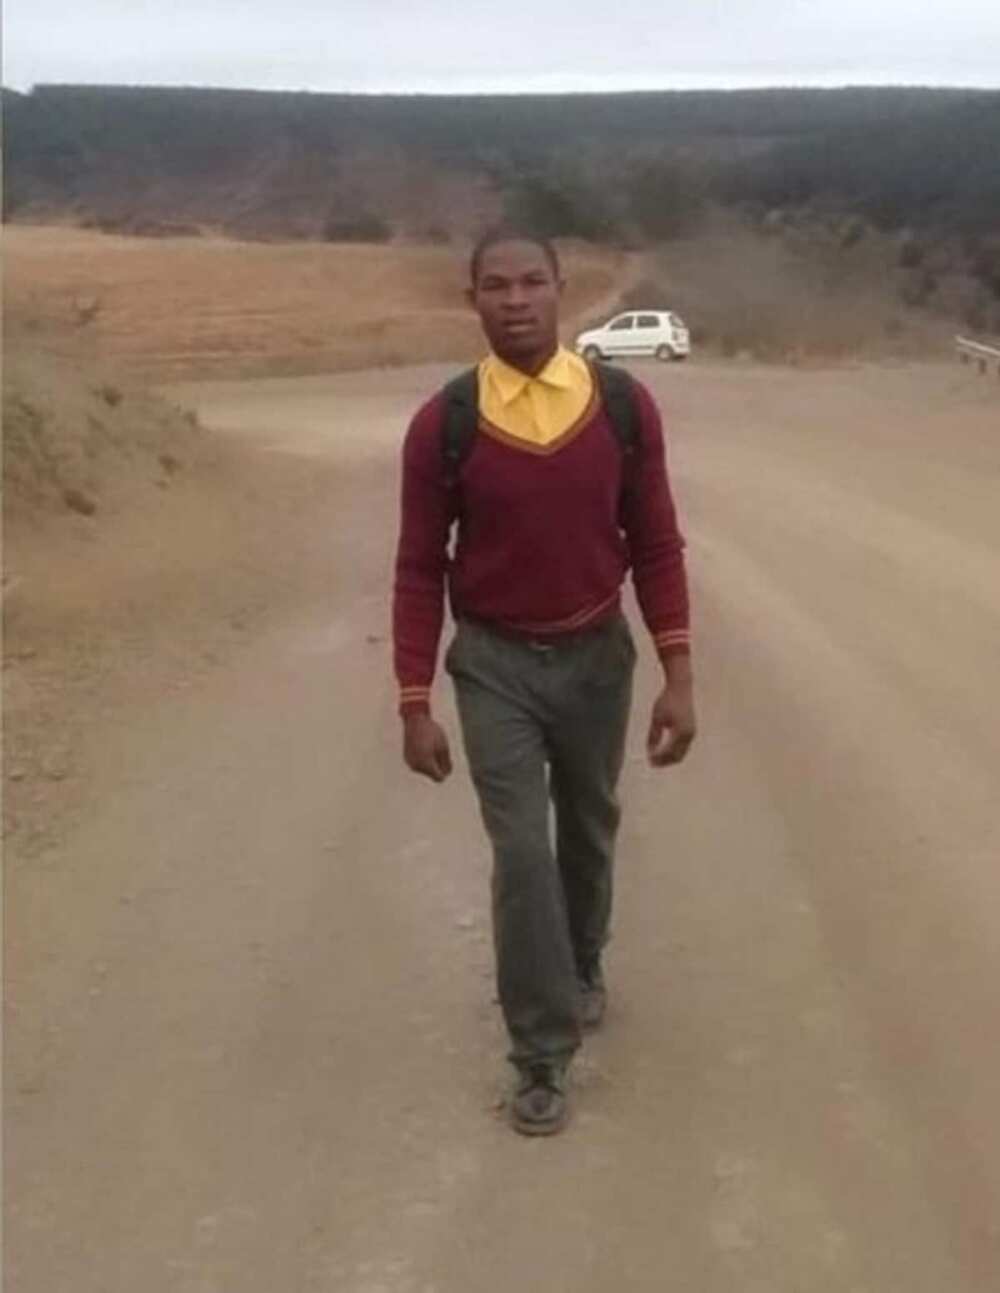 Dedicated Grade 11 pupil walks 20km to and from school each day